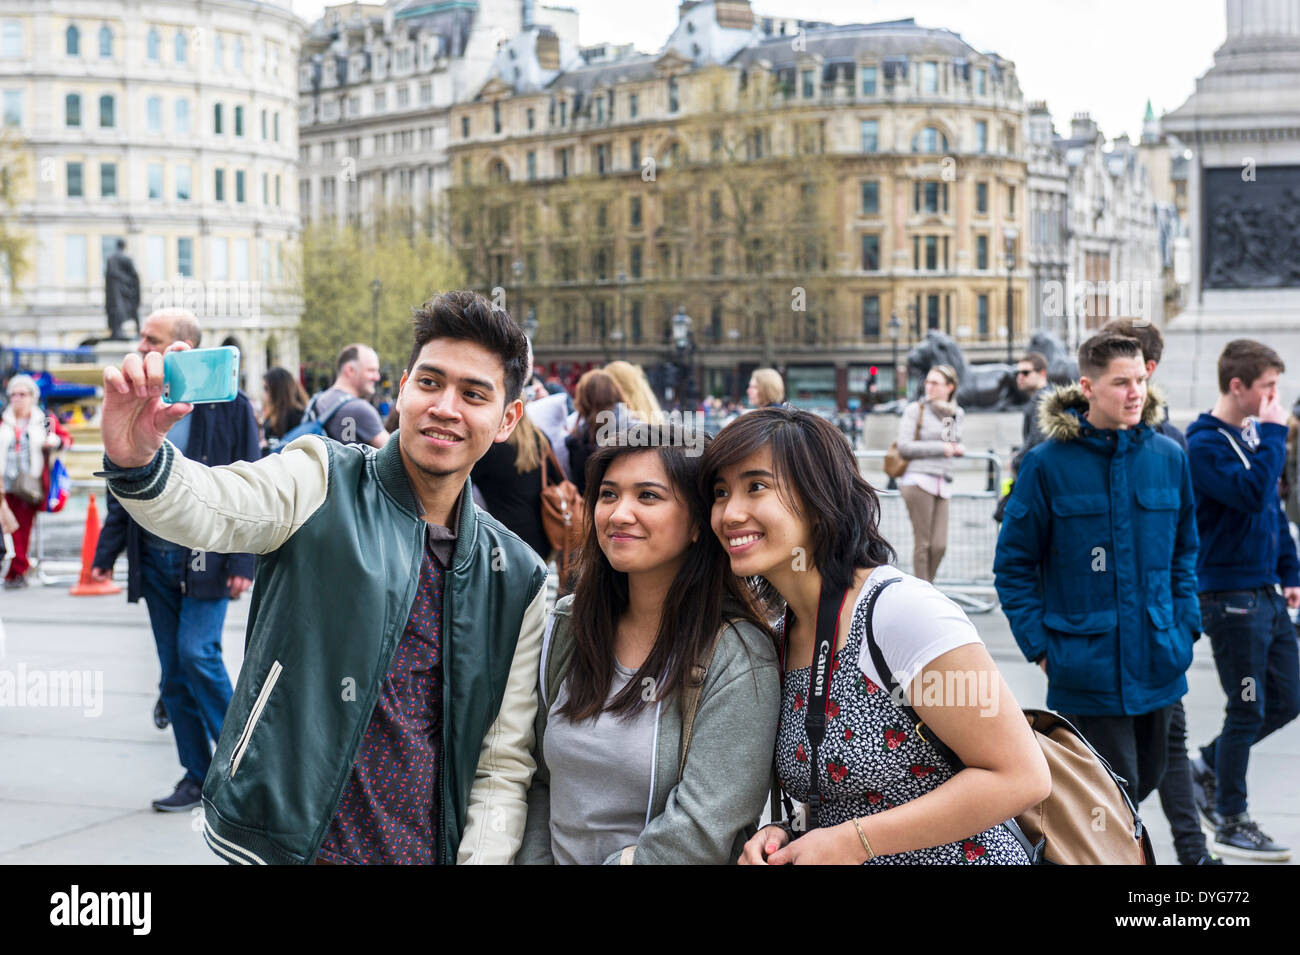 A group of tourists posing for a selfie in Trafalgar Square in London. Stock Photo